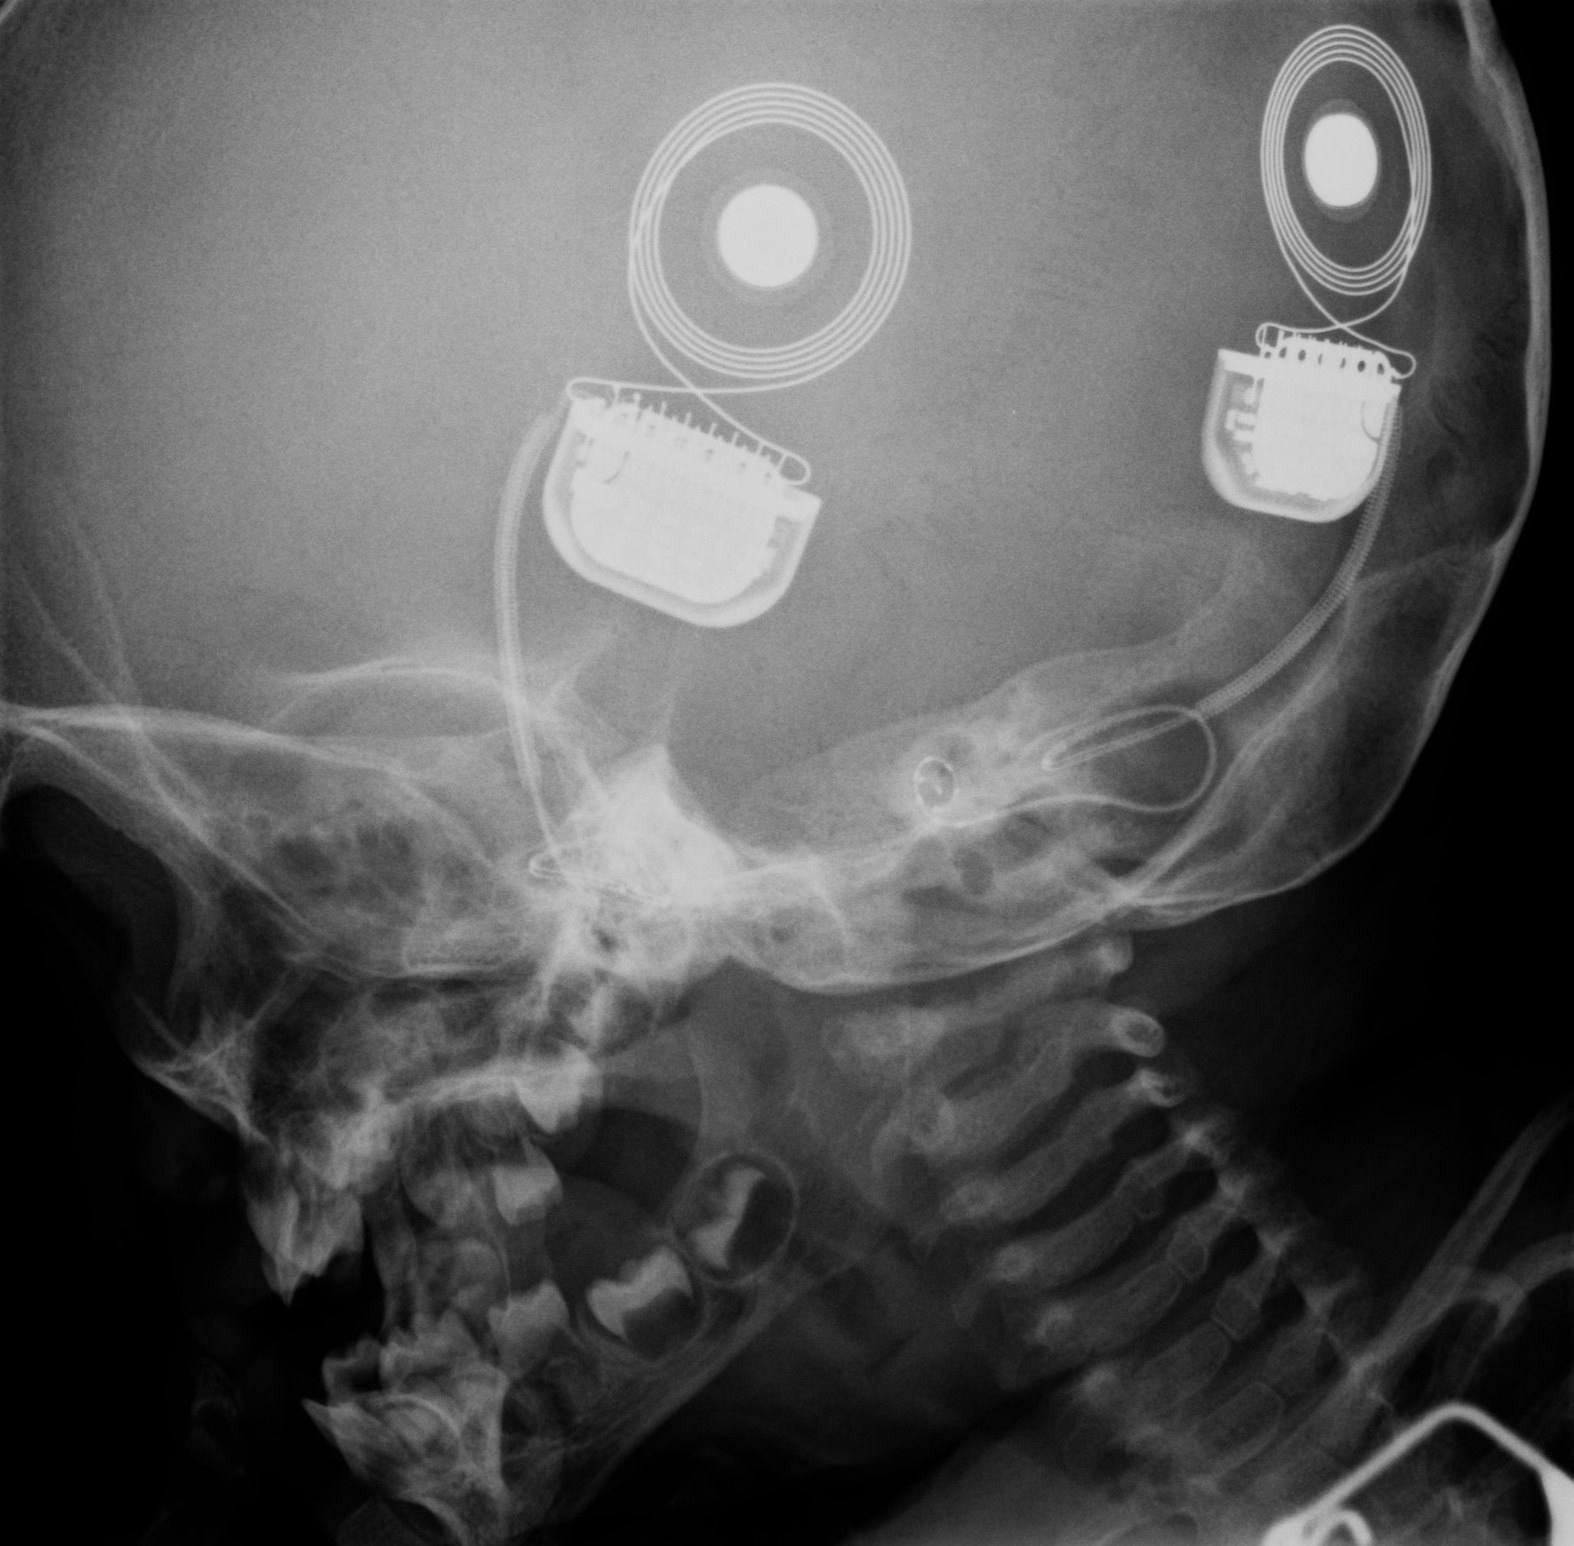 x-ray of the cochlea with cochlear implant